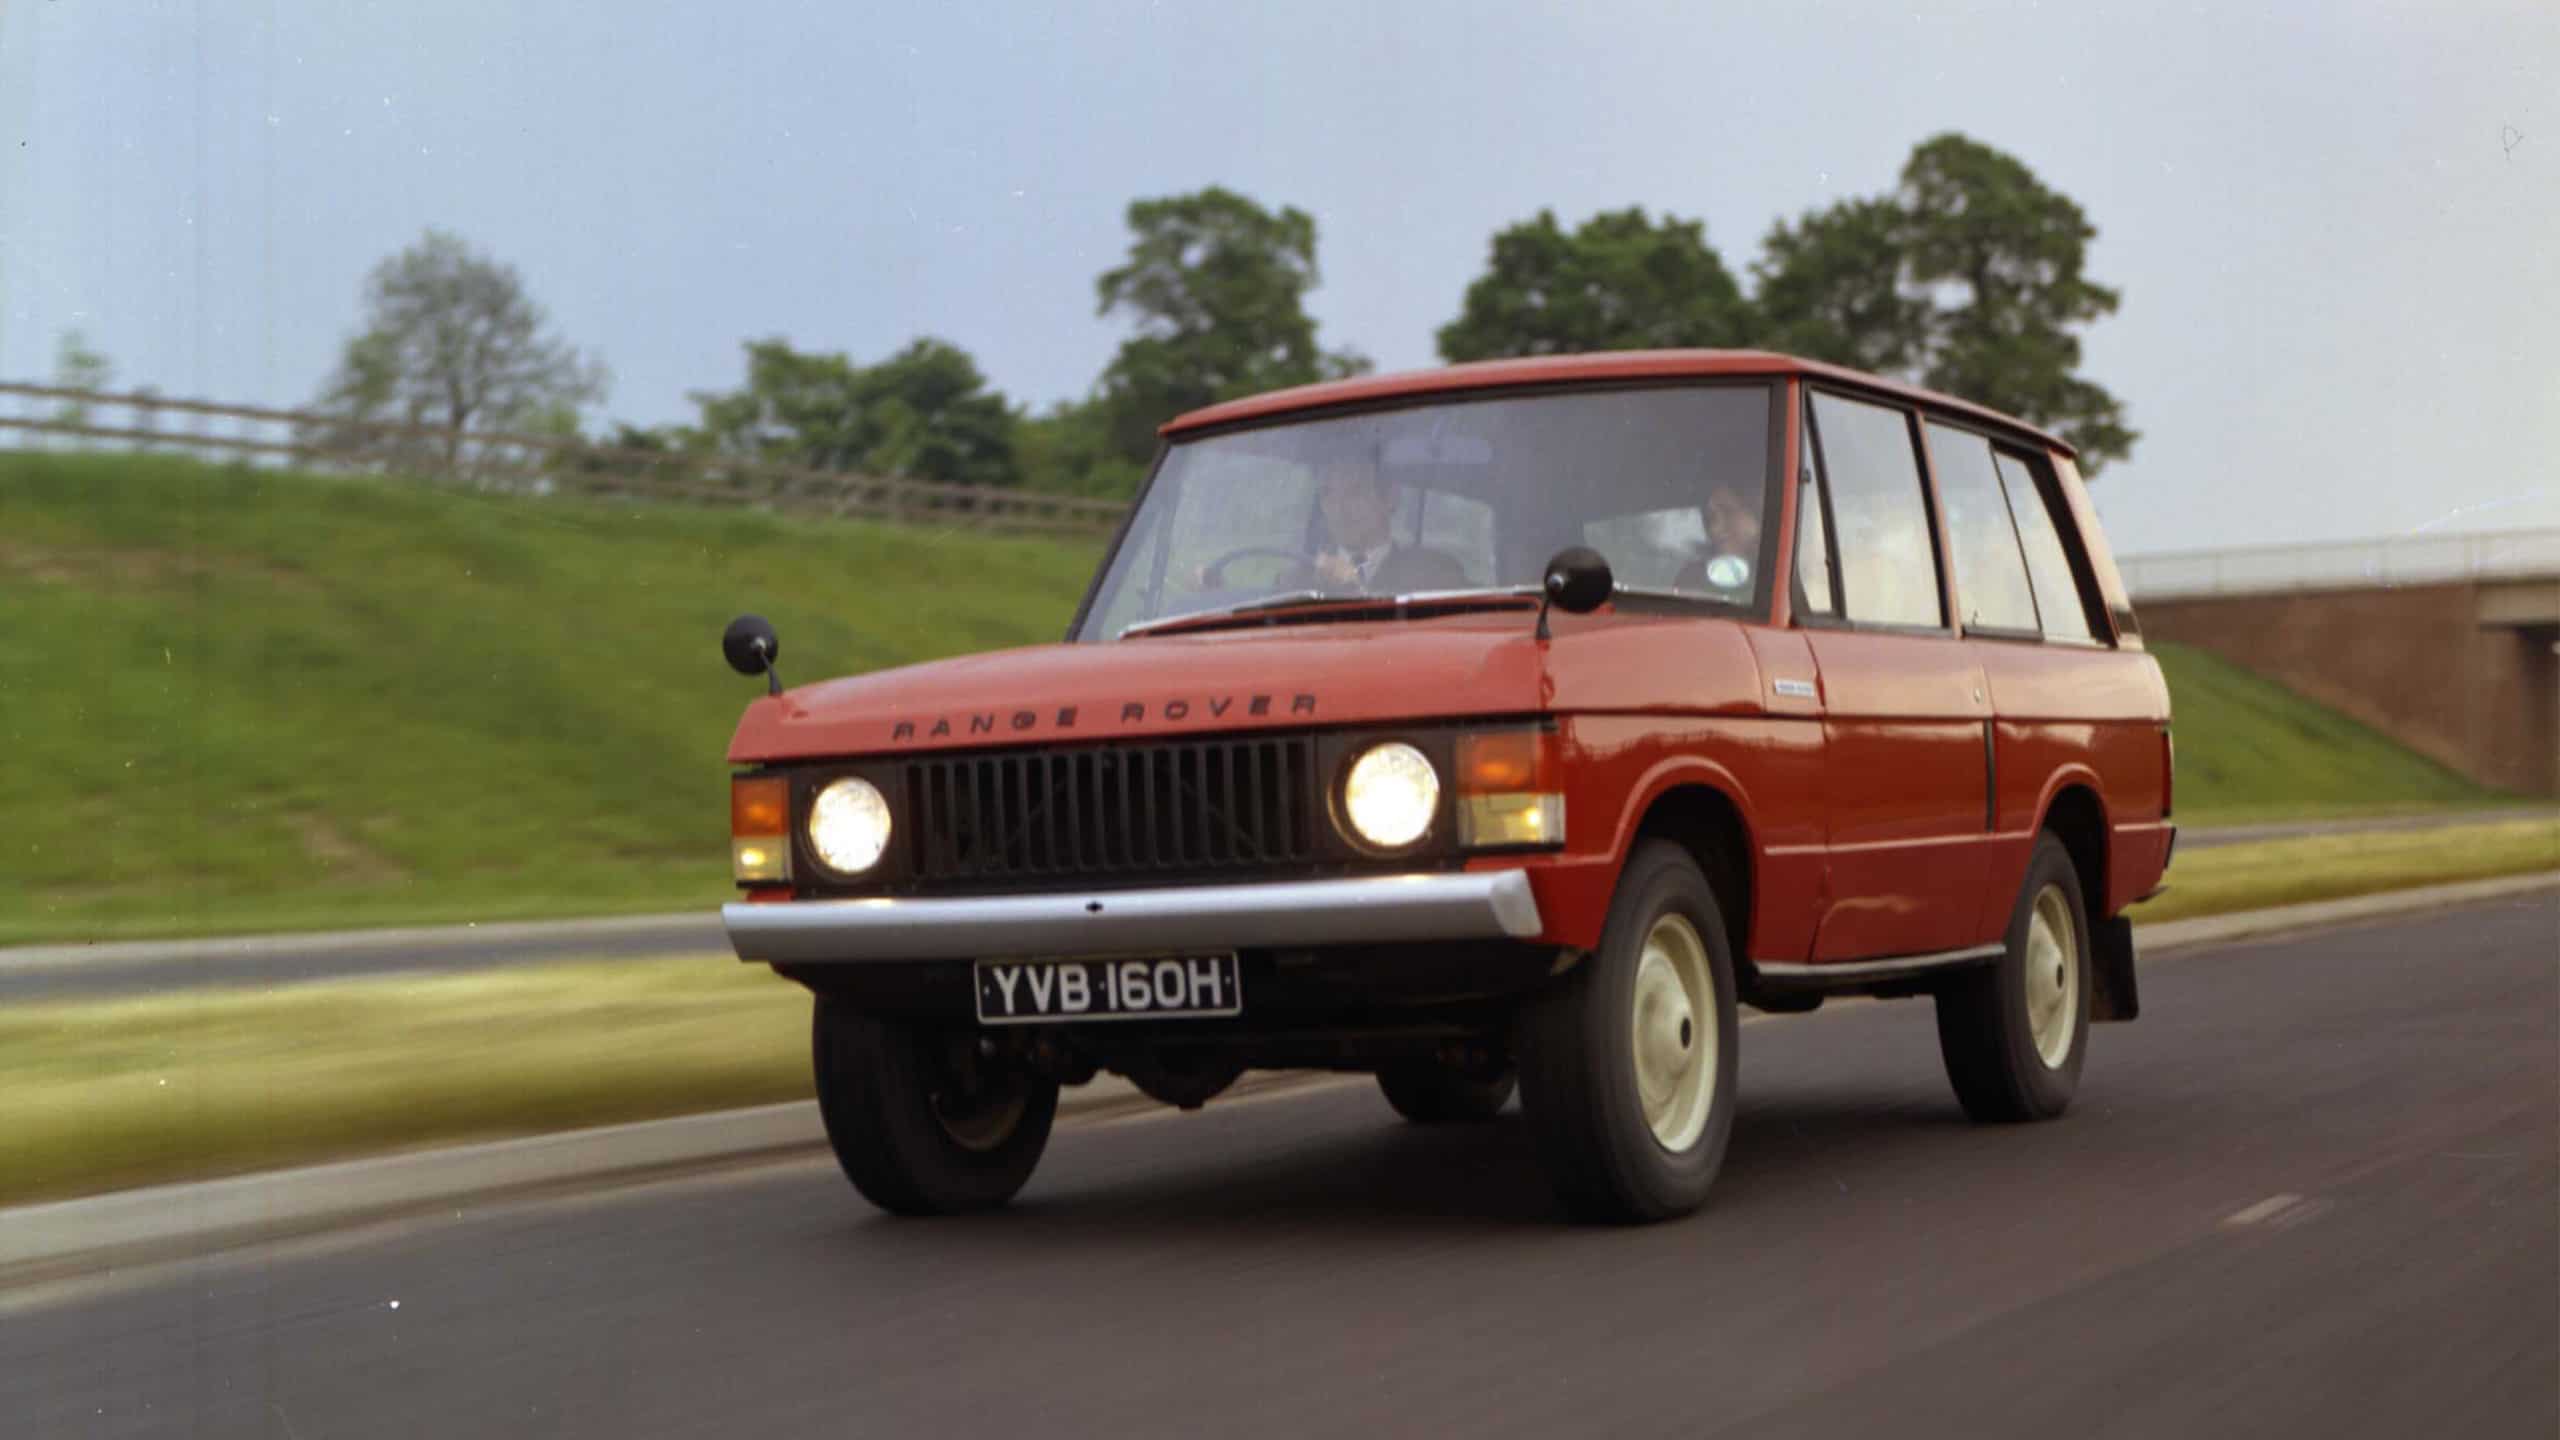 1970 classic ranger rover moving on the road